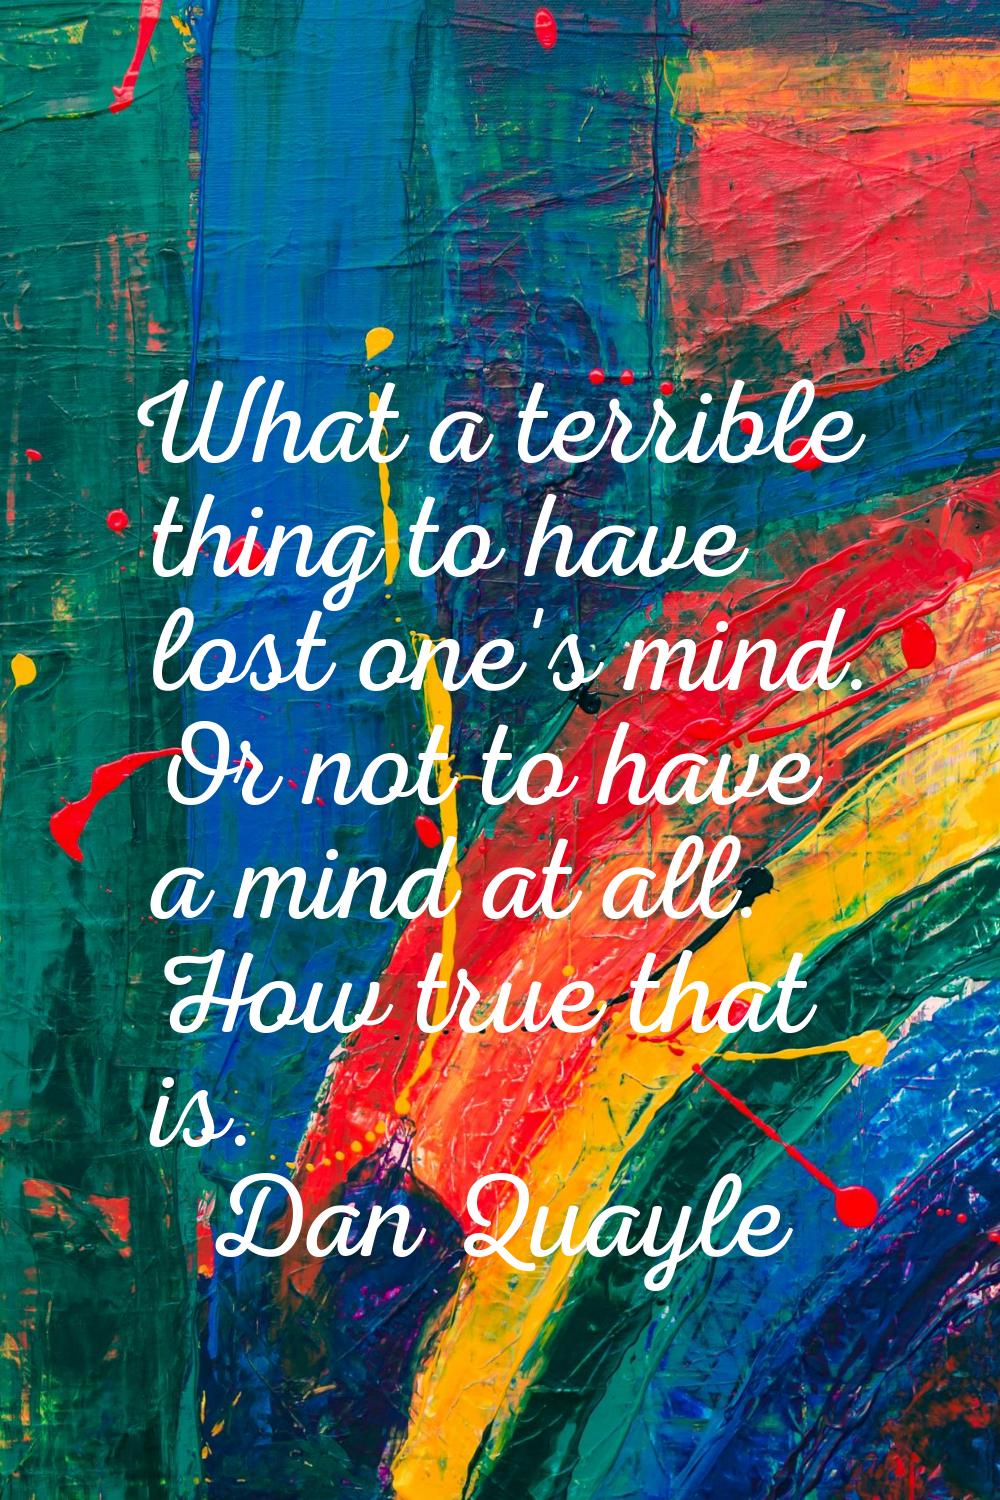 What a terrible thing to have lost one's mind. Or not to have a mind at all. How true that is.